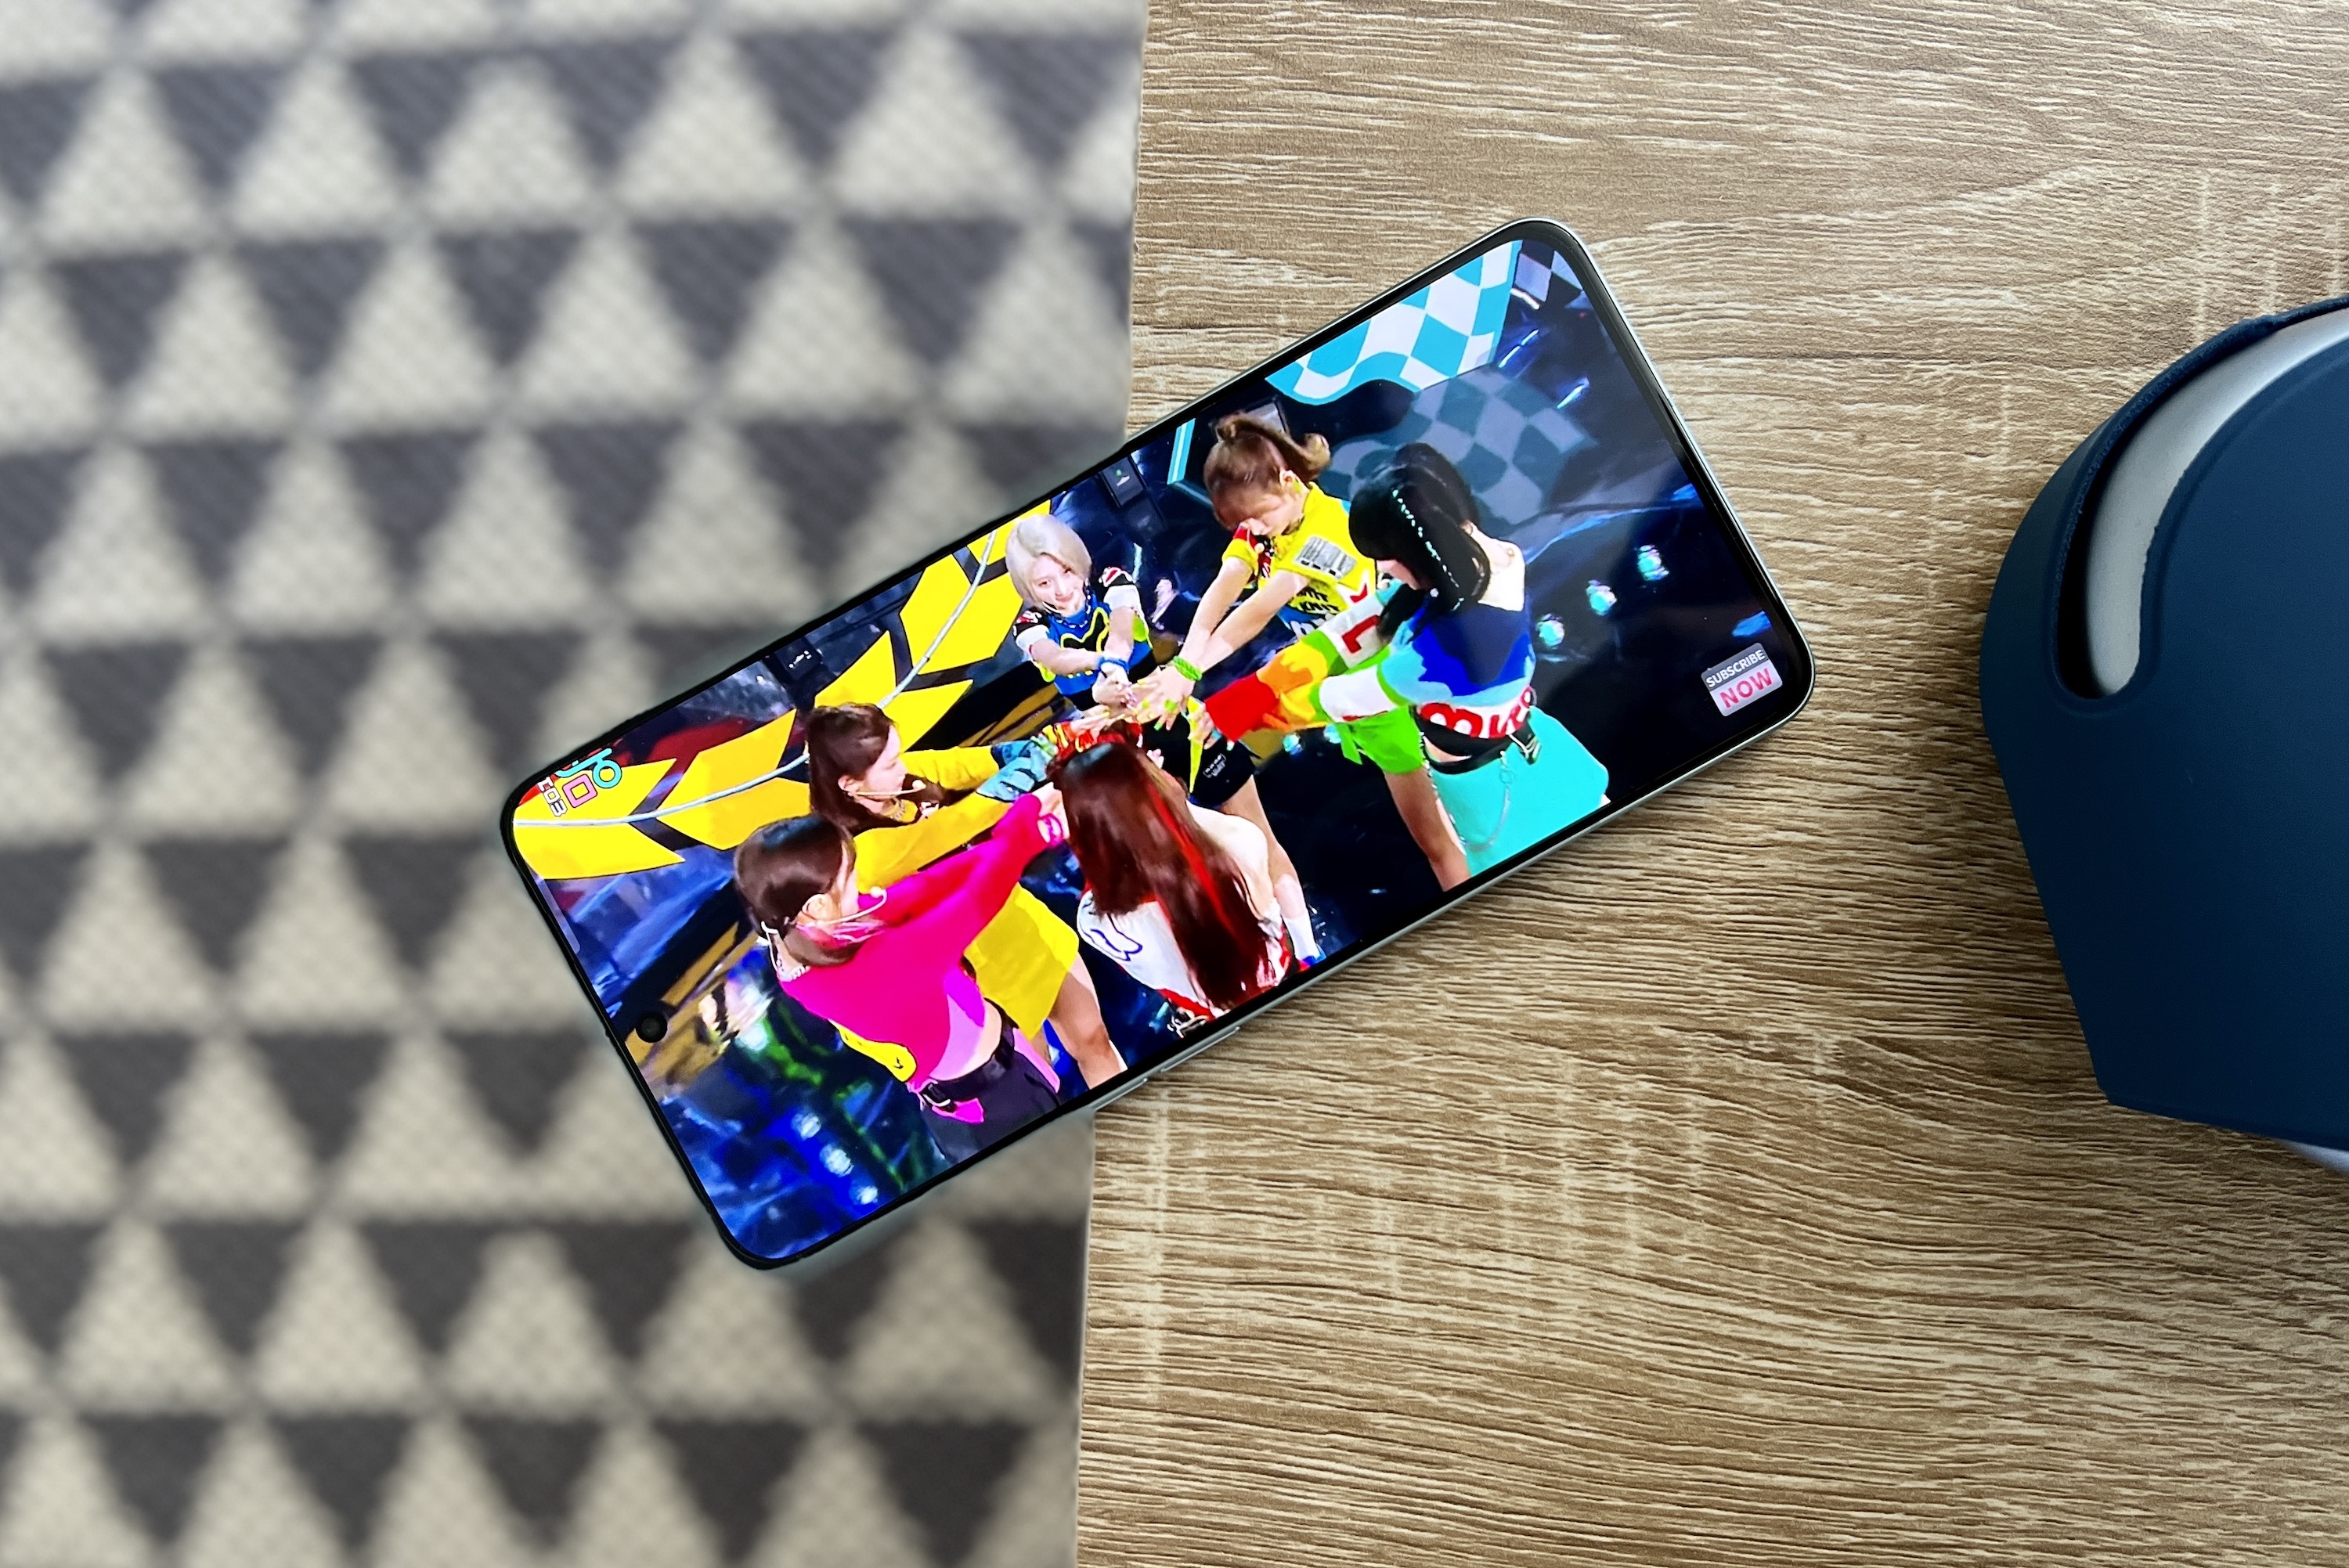 Video playing on the Oppo Reno 8 Pro.